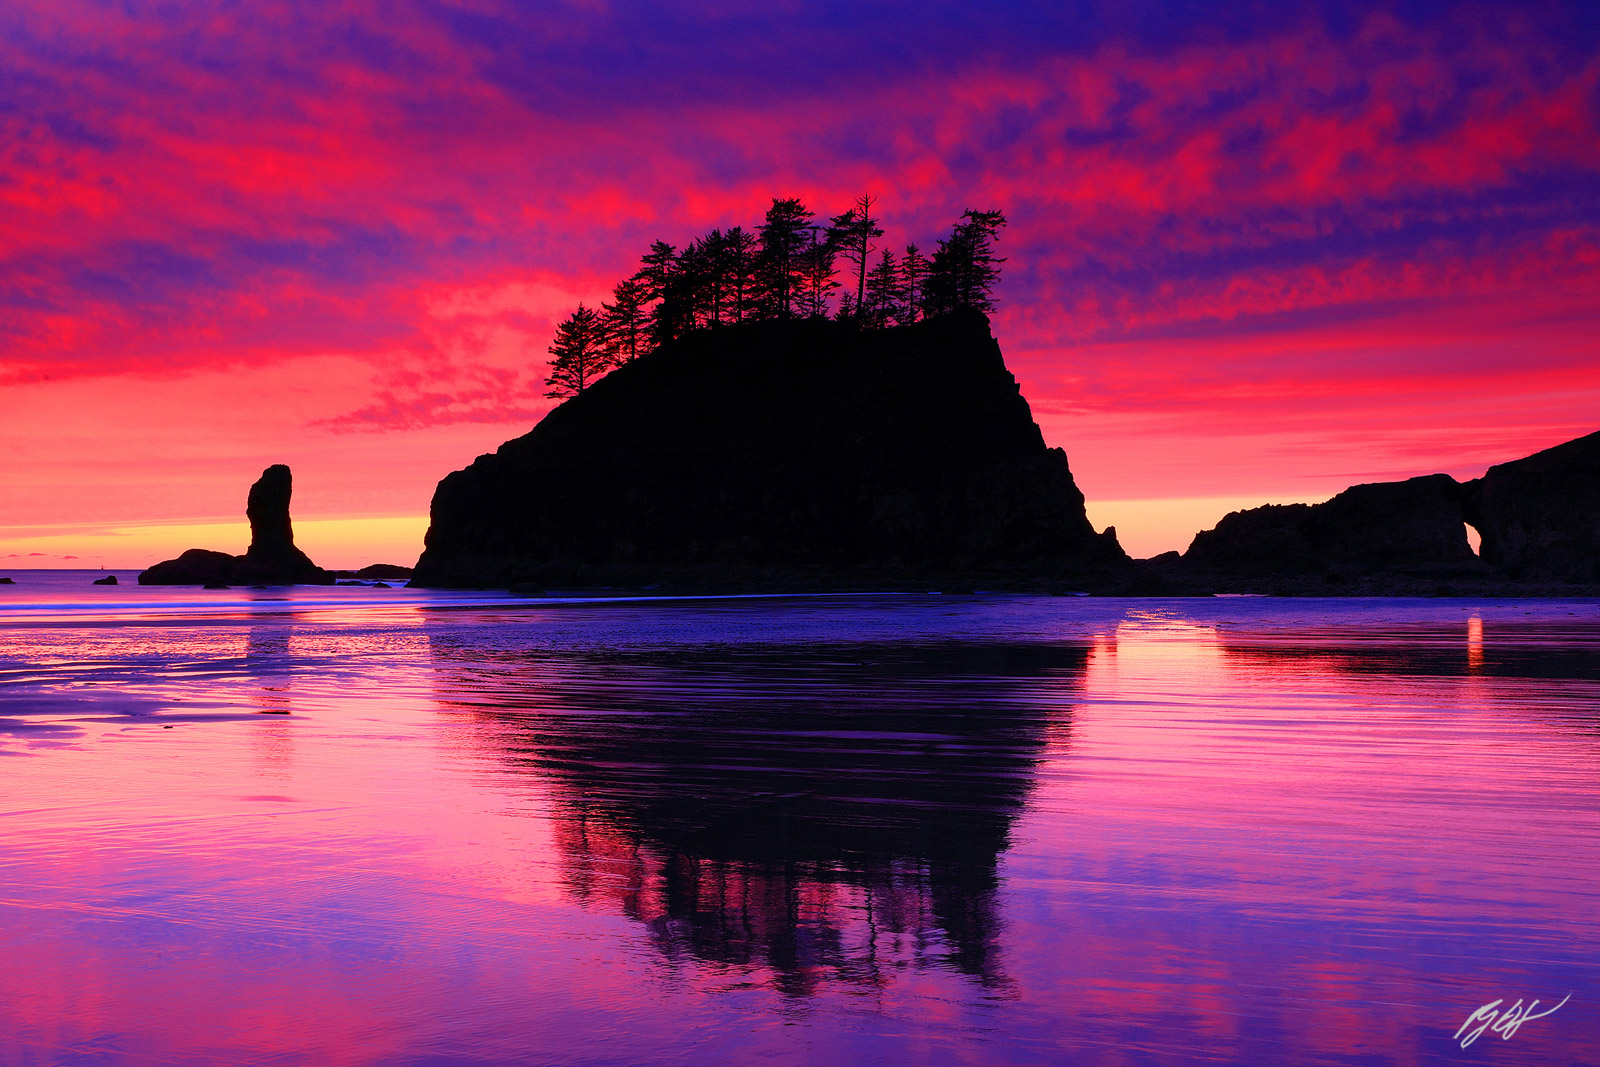 Sunset and Sea Stacks on Second Beach in Olympic National Park in Washington